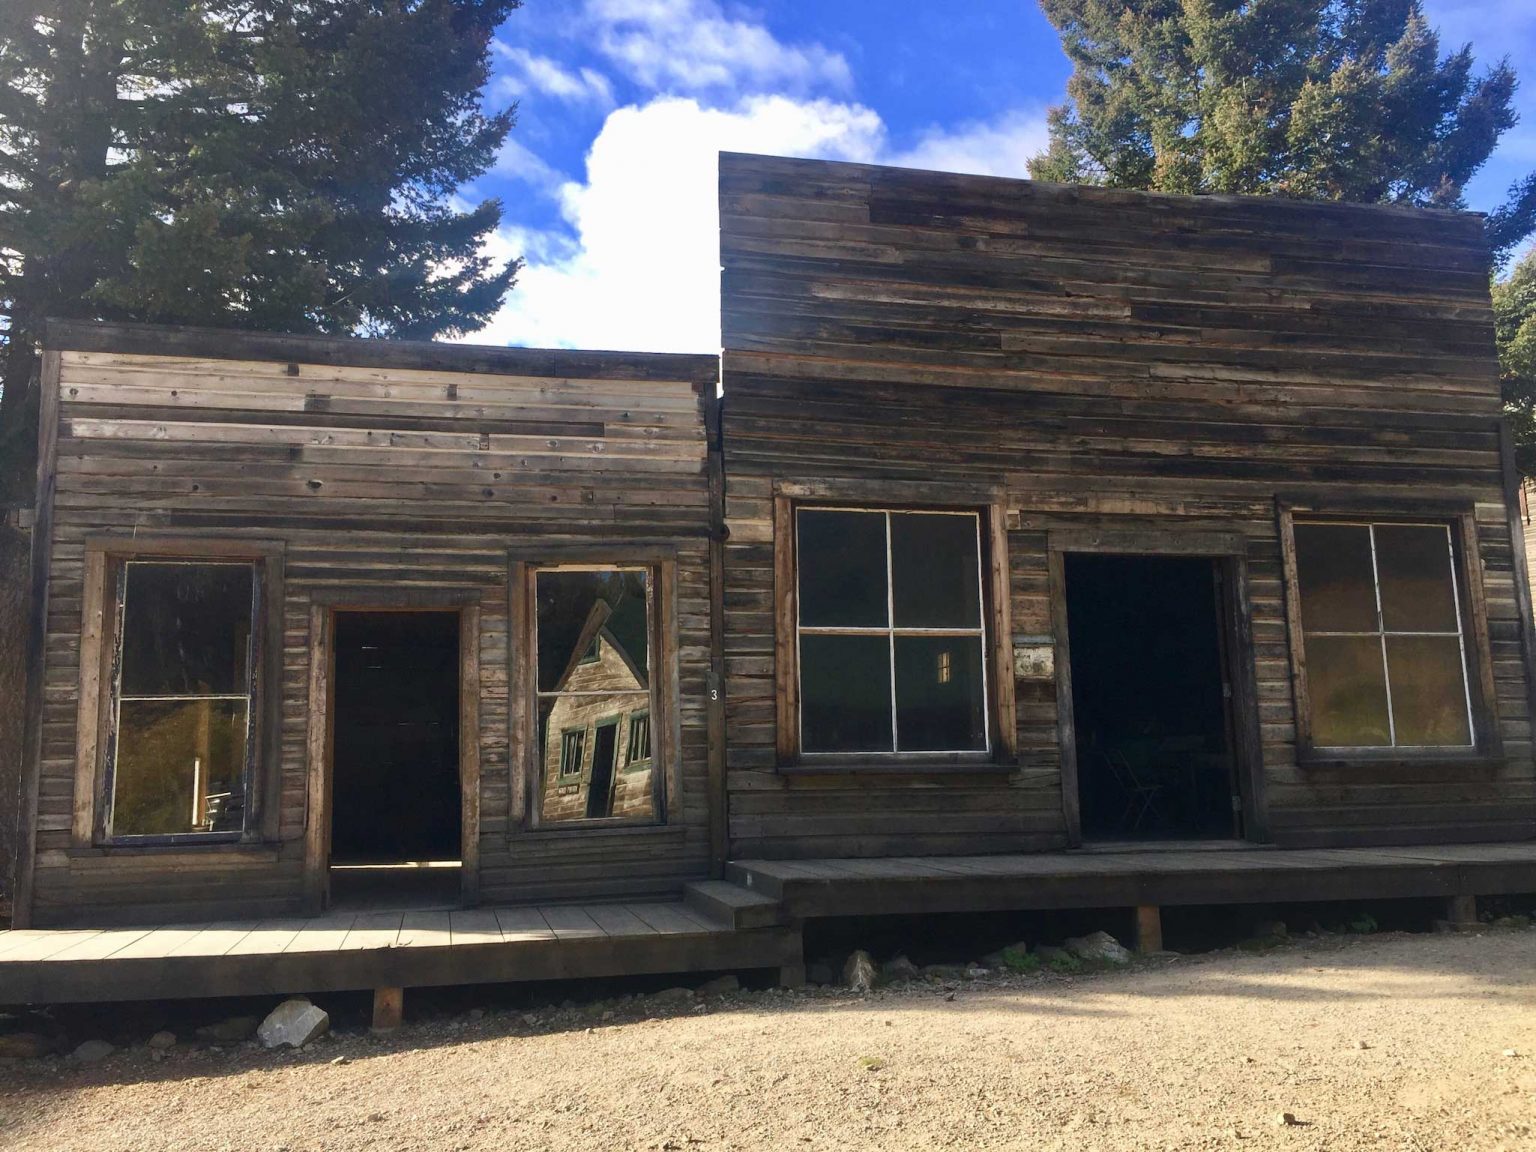 Visiting Montana's Ghost Town ActionHub